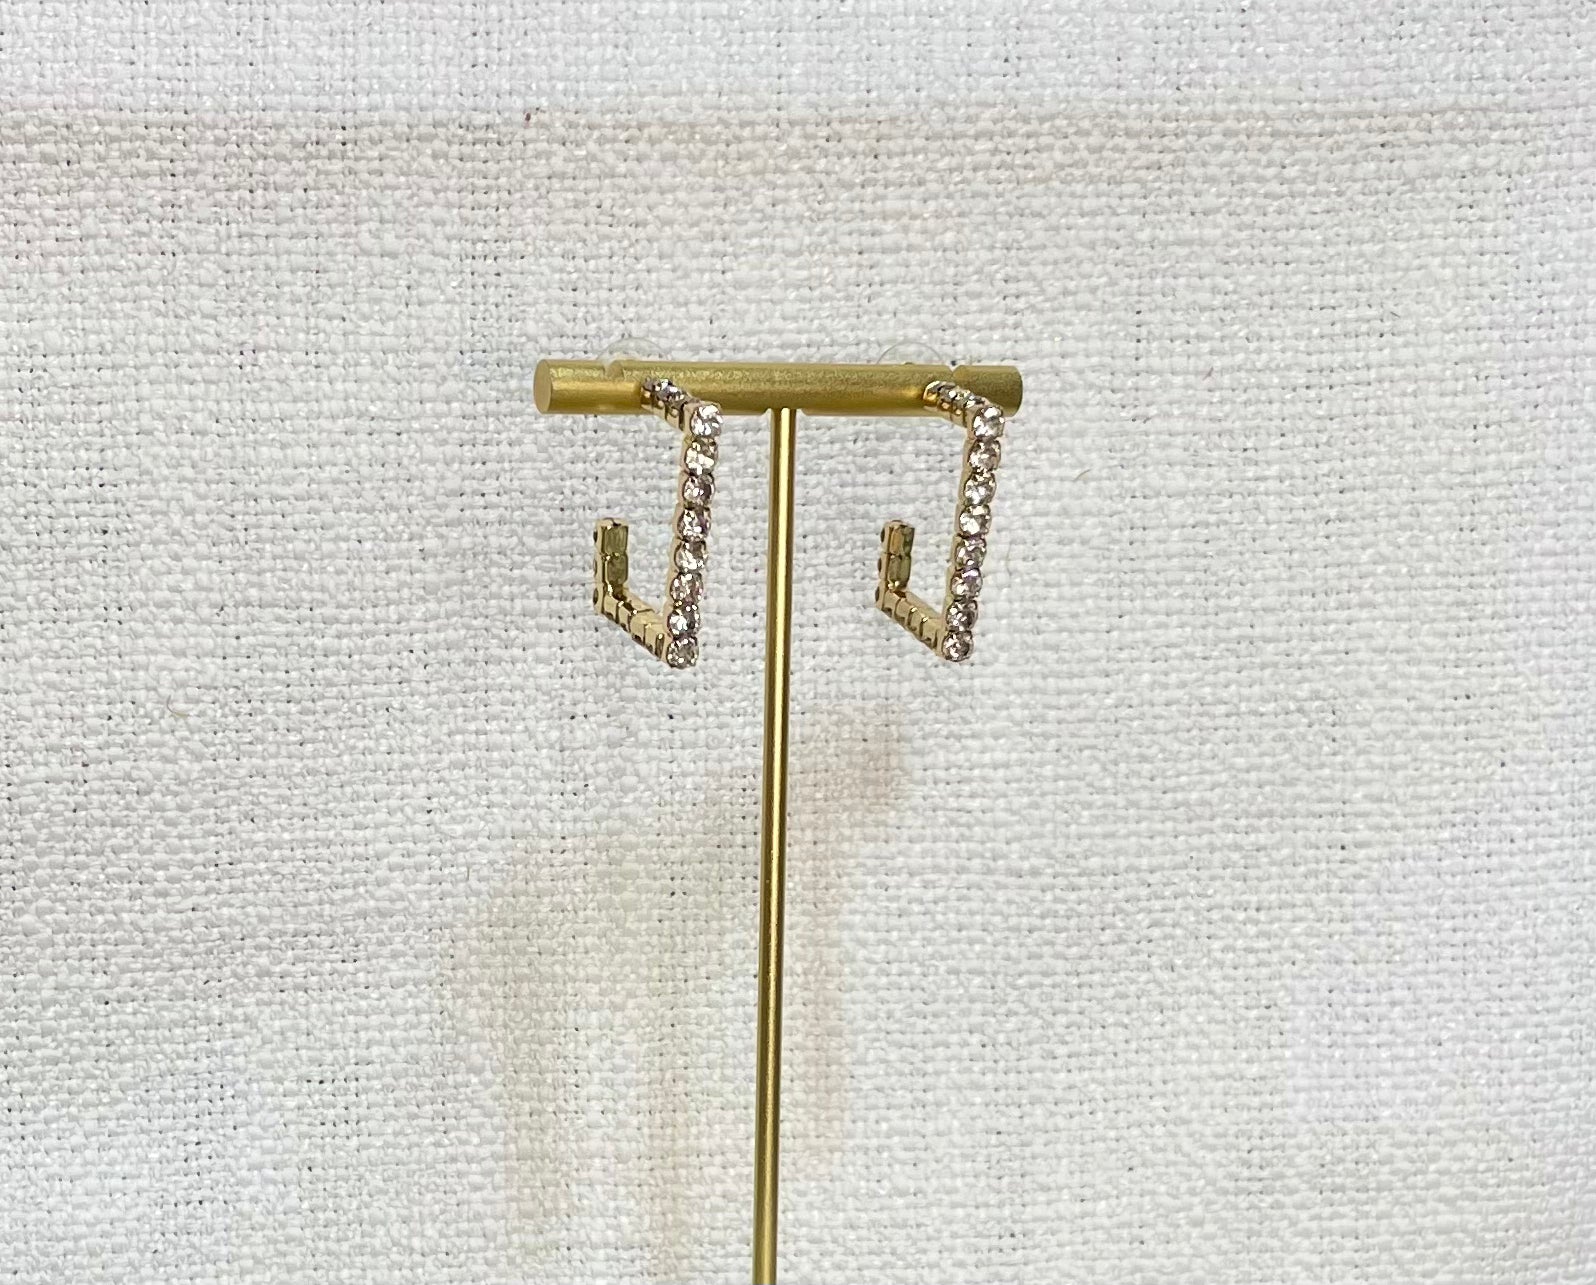 Small Gold Geometric Earrings with Clear Stones